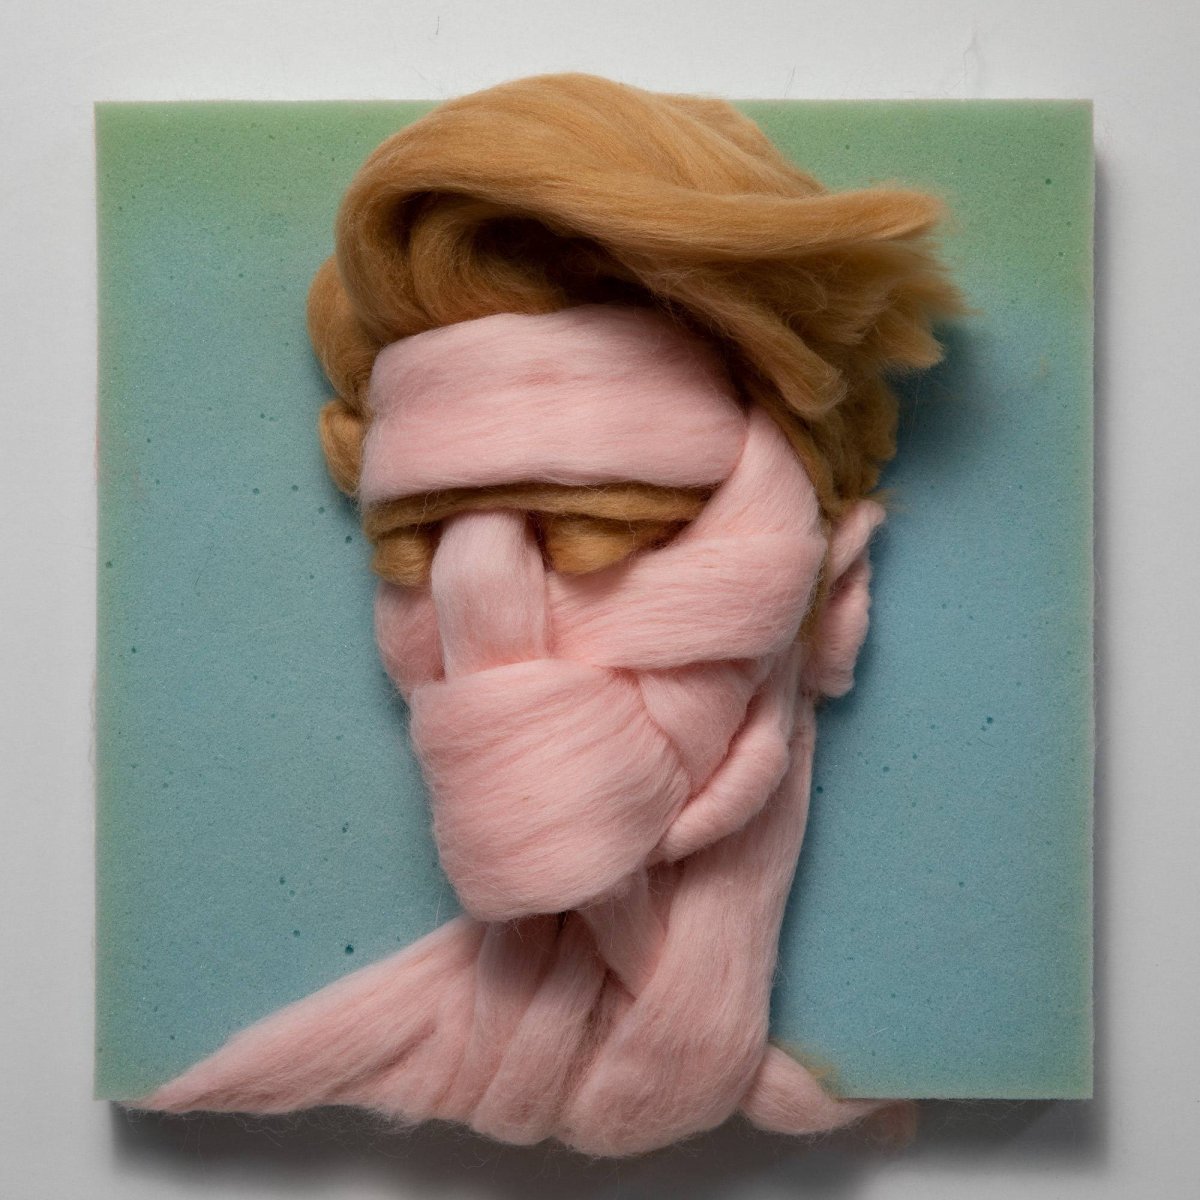 Expressive Sculptural Portraits Made Of Raw Wool By Salman Khoshroo 10